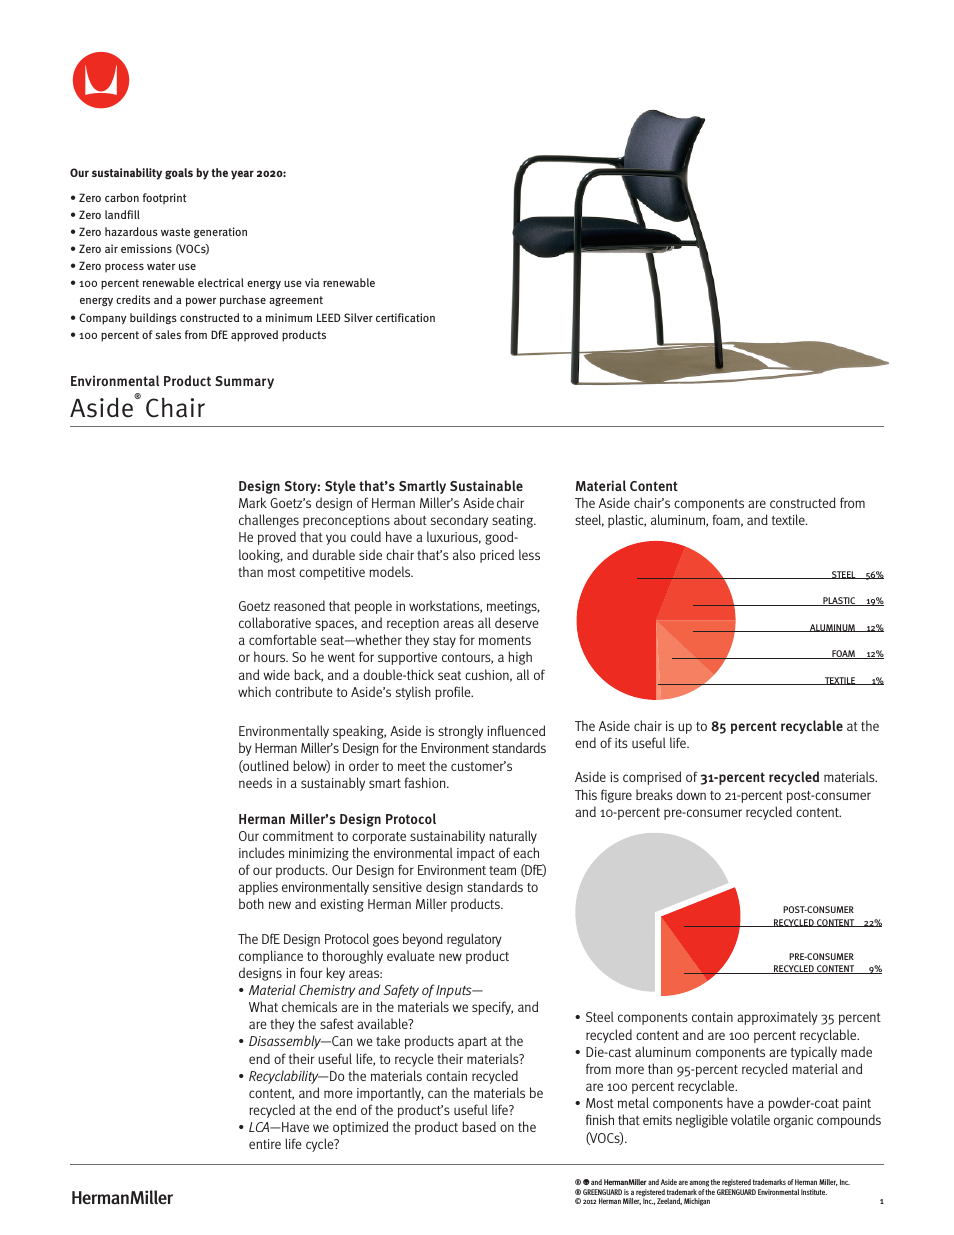 Aside Chairs - Environmental Product Summary